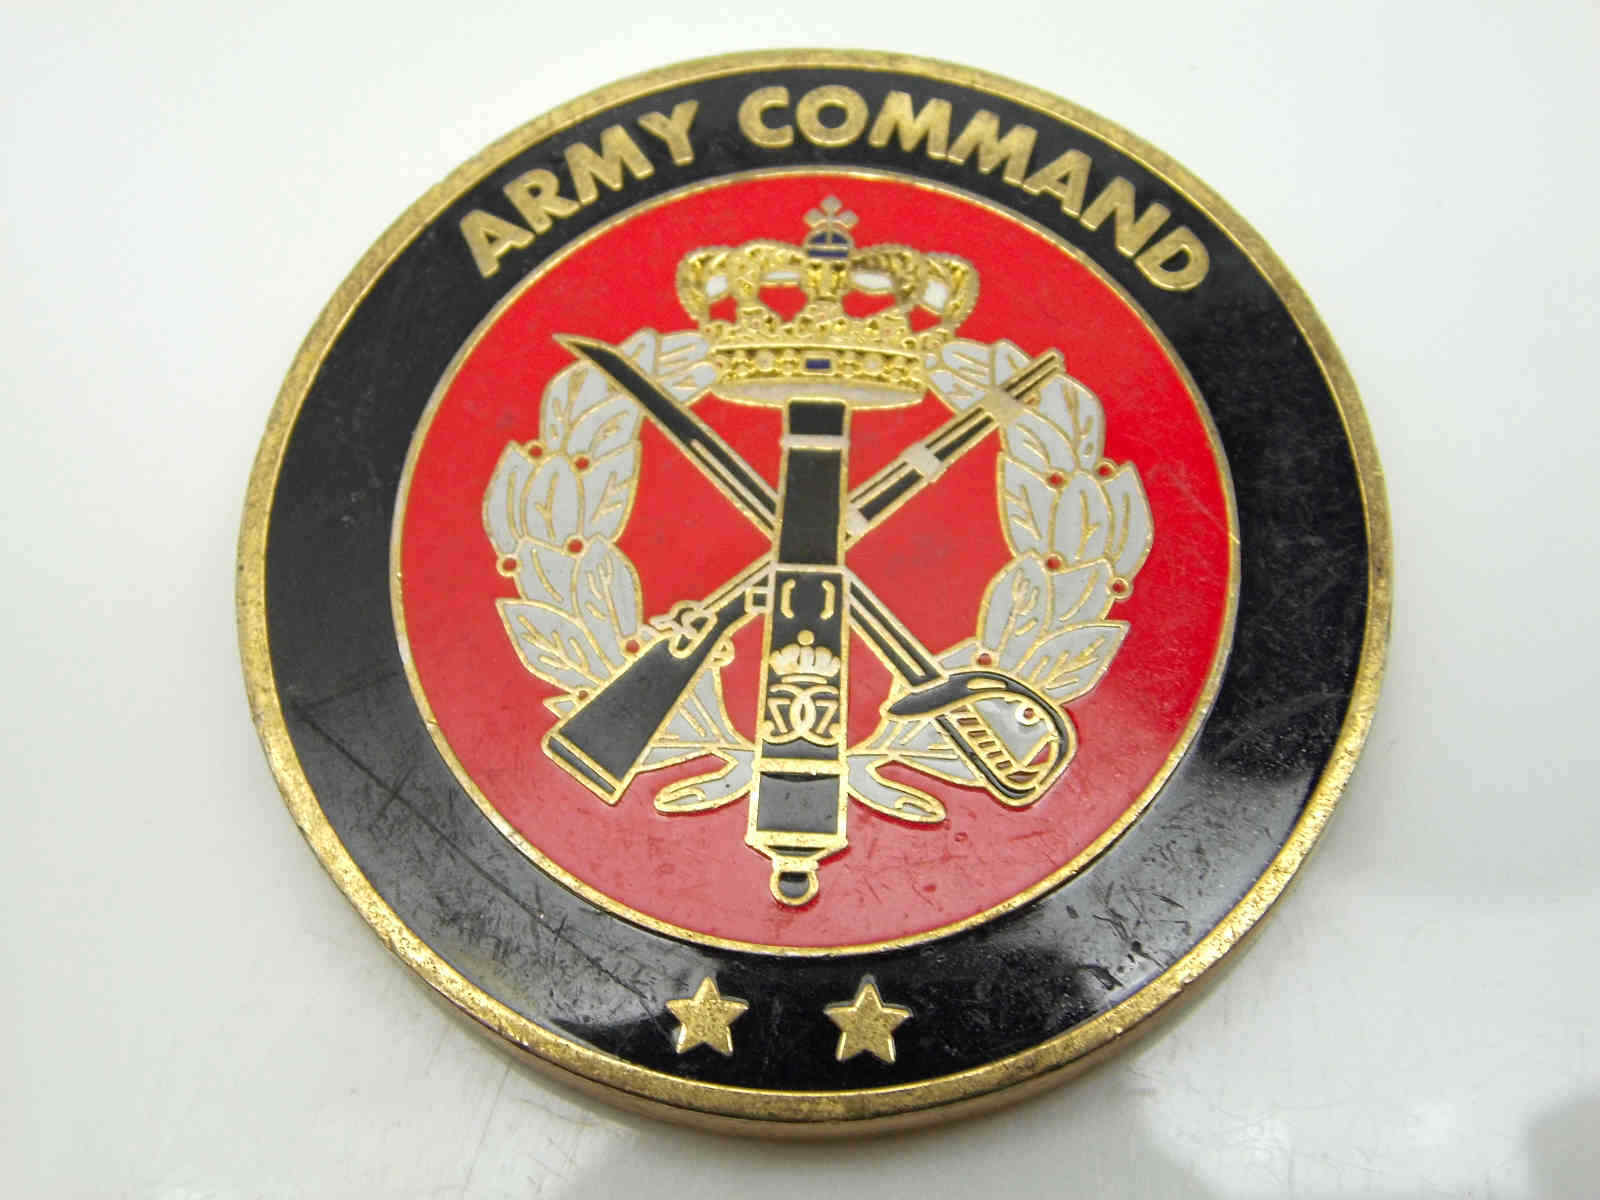 ARMY COMMAND WITH HONOUR AND RESPECT DENMARK CHALLENGE COIN